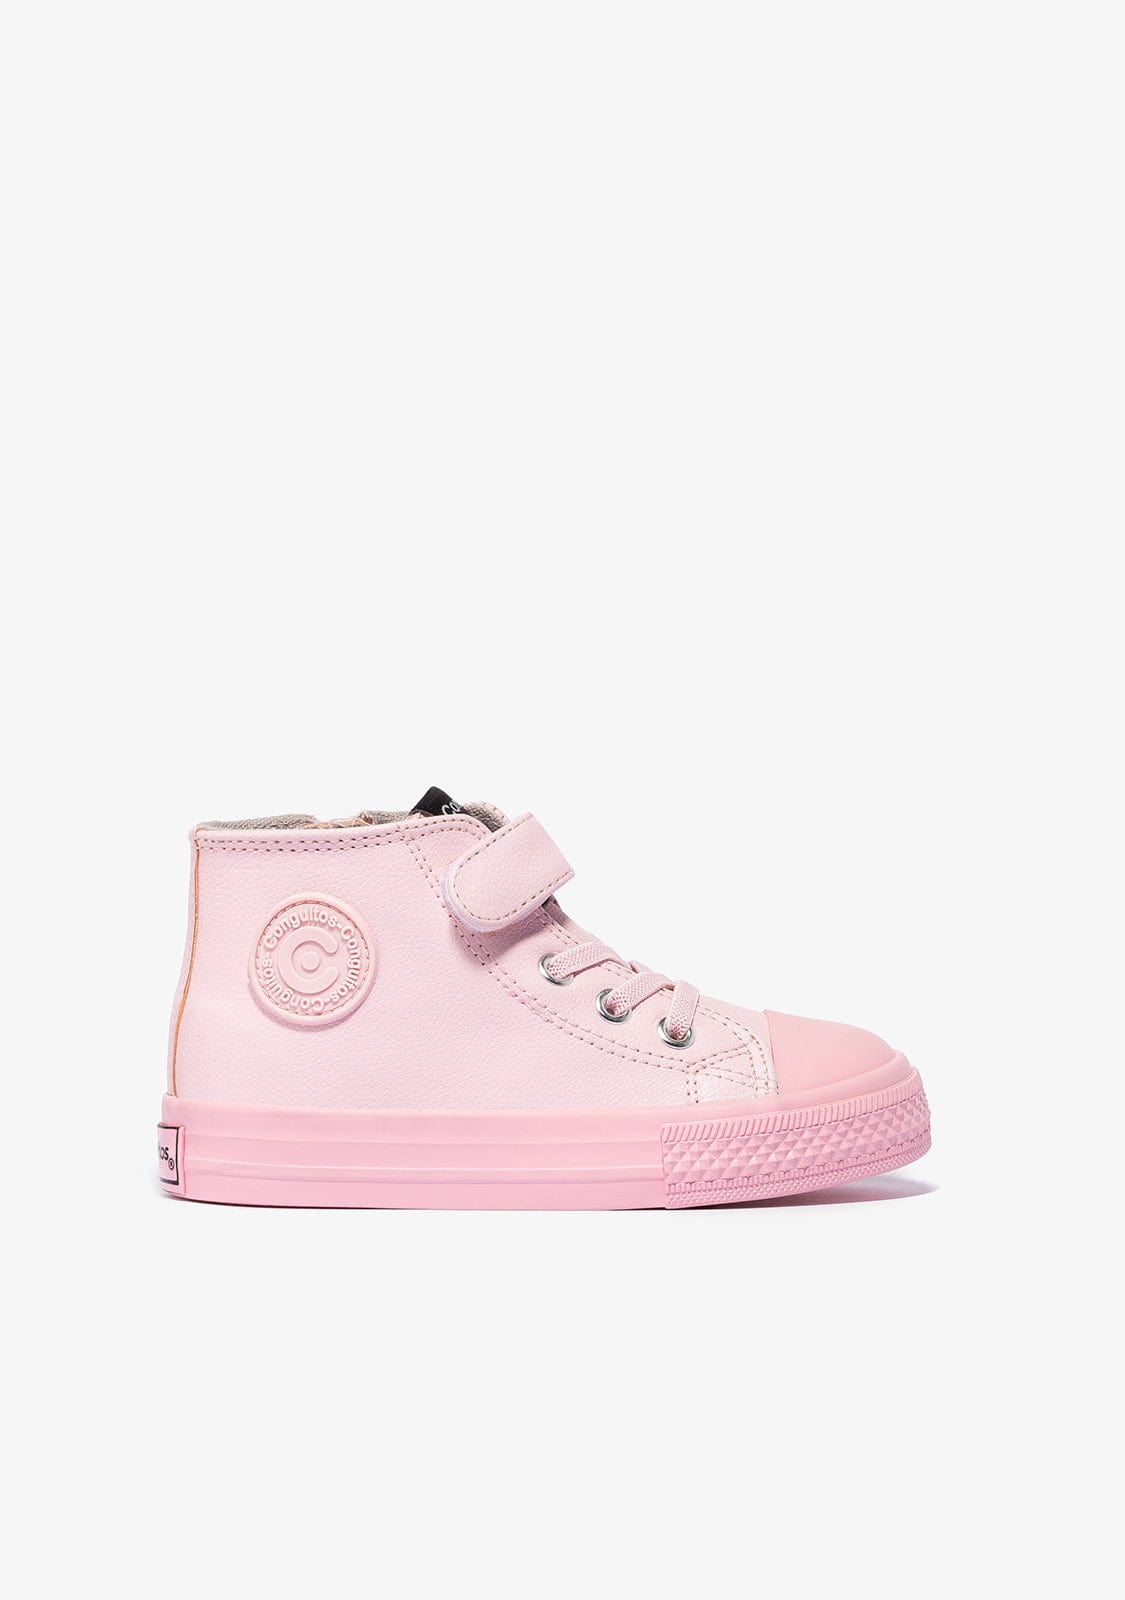 CONGUITOS Shoes Unisex Color Block Pink High-Top Sneakers